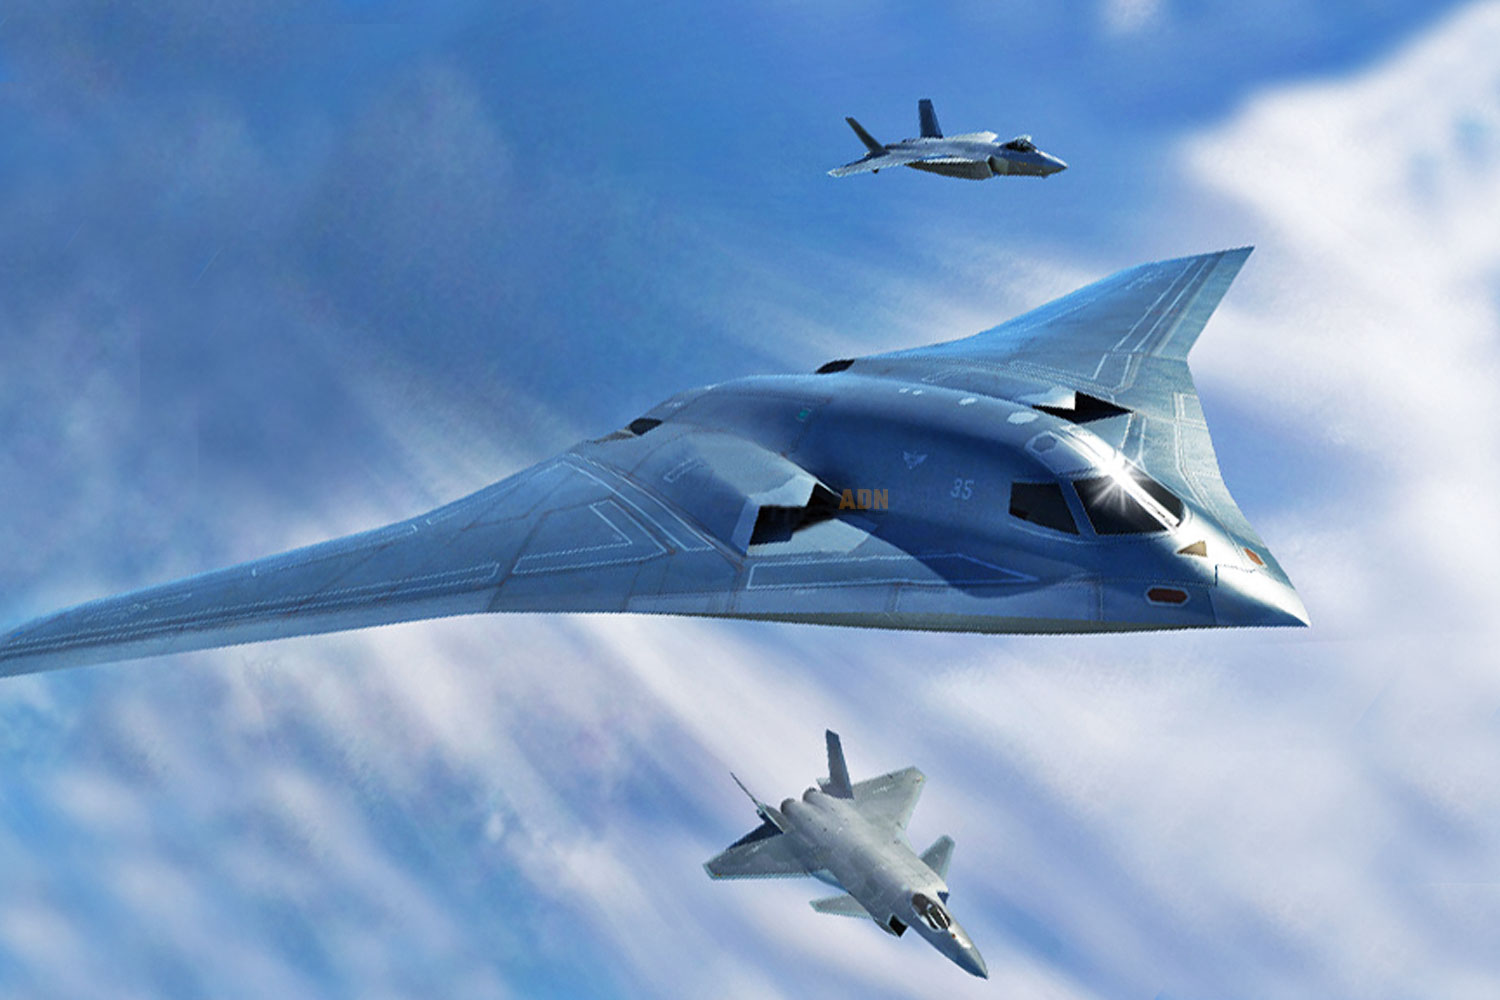 Xian H-20 stealth bomber rendering